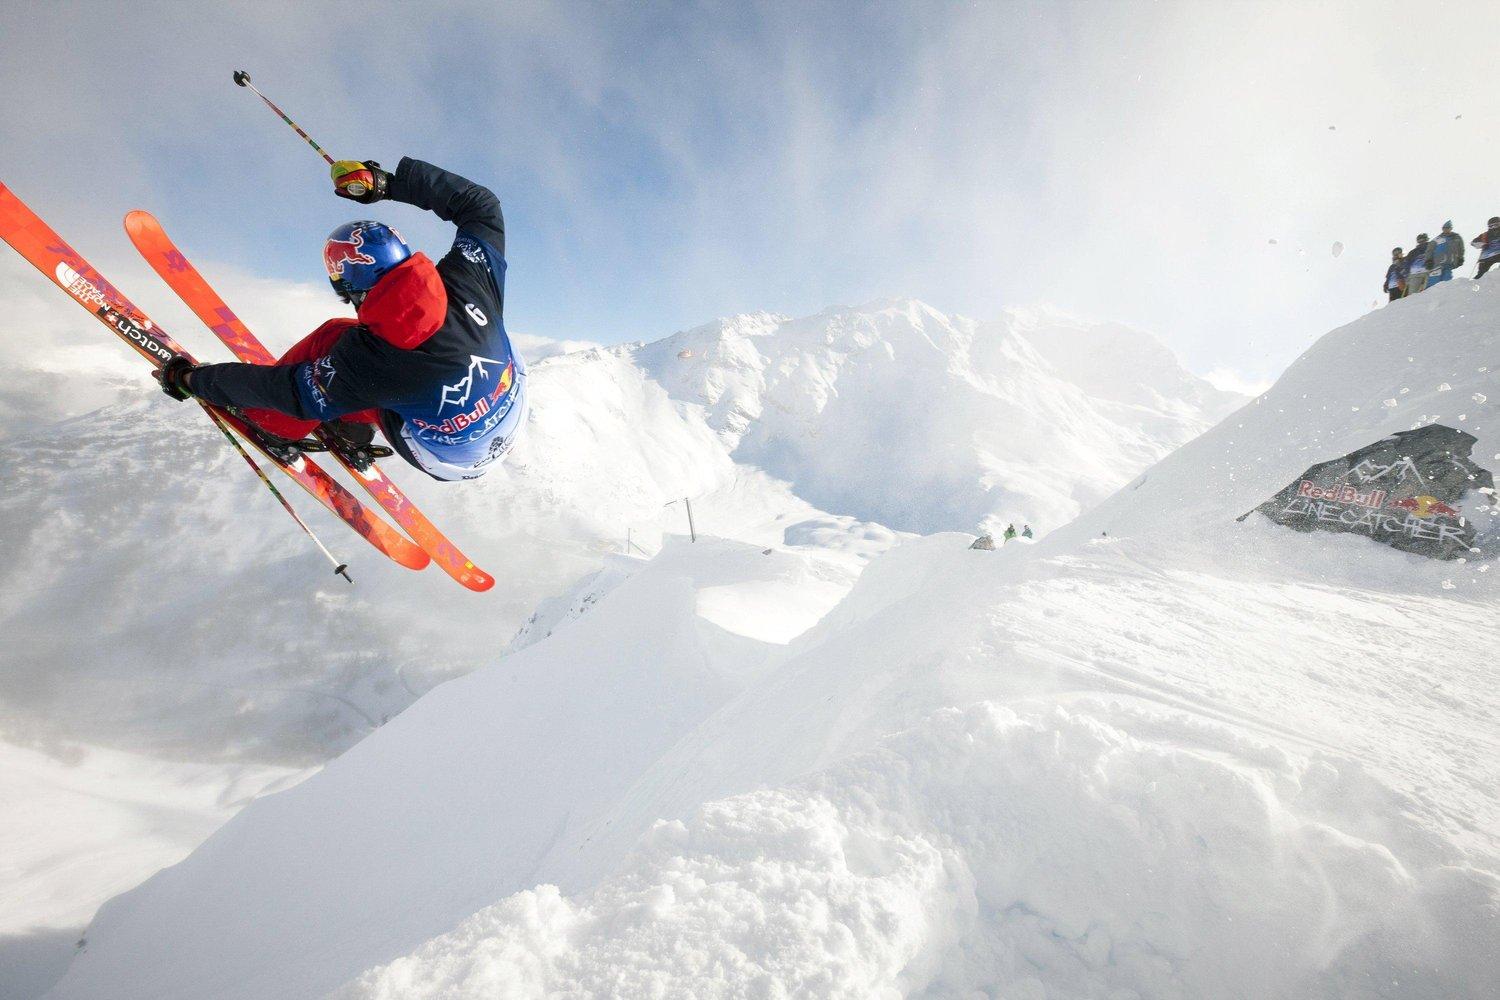 Red Bull Linecatcher 2013: Action from Les Arcs